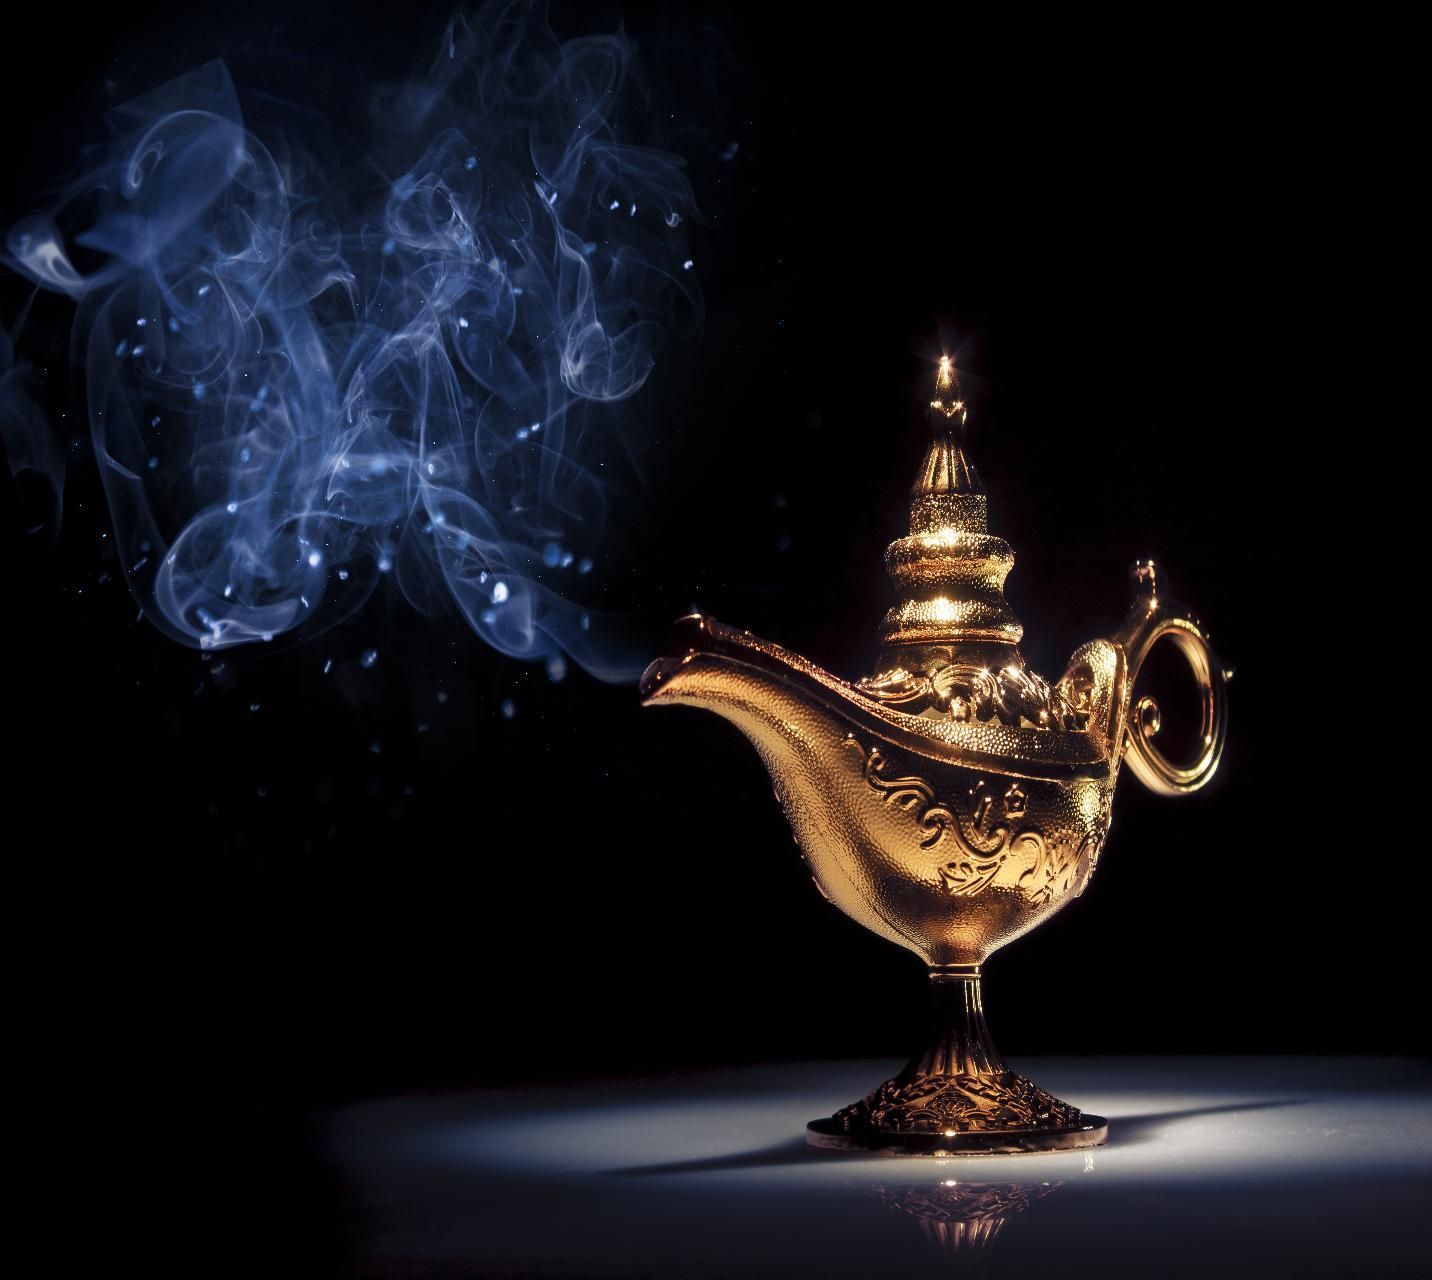 Download Make a wish Wallpaper by abej666 now. Browse millions of popular abej Wallpaper and Rin. Genie lamp, Genie in a bottle, Magic lamp